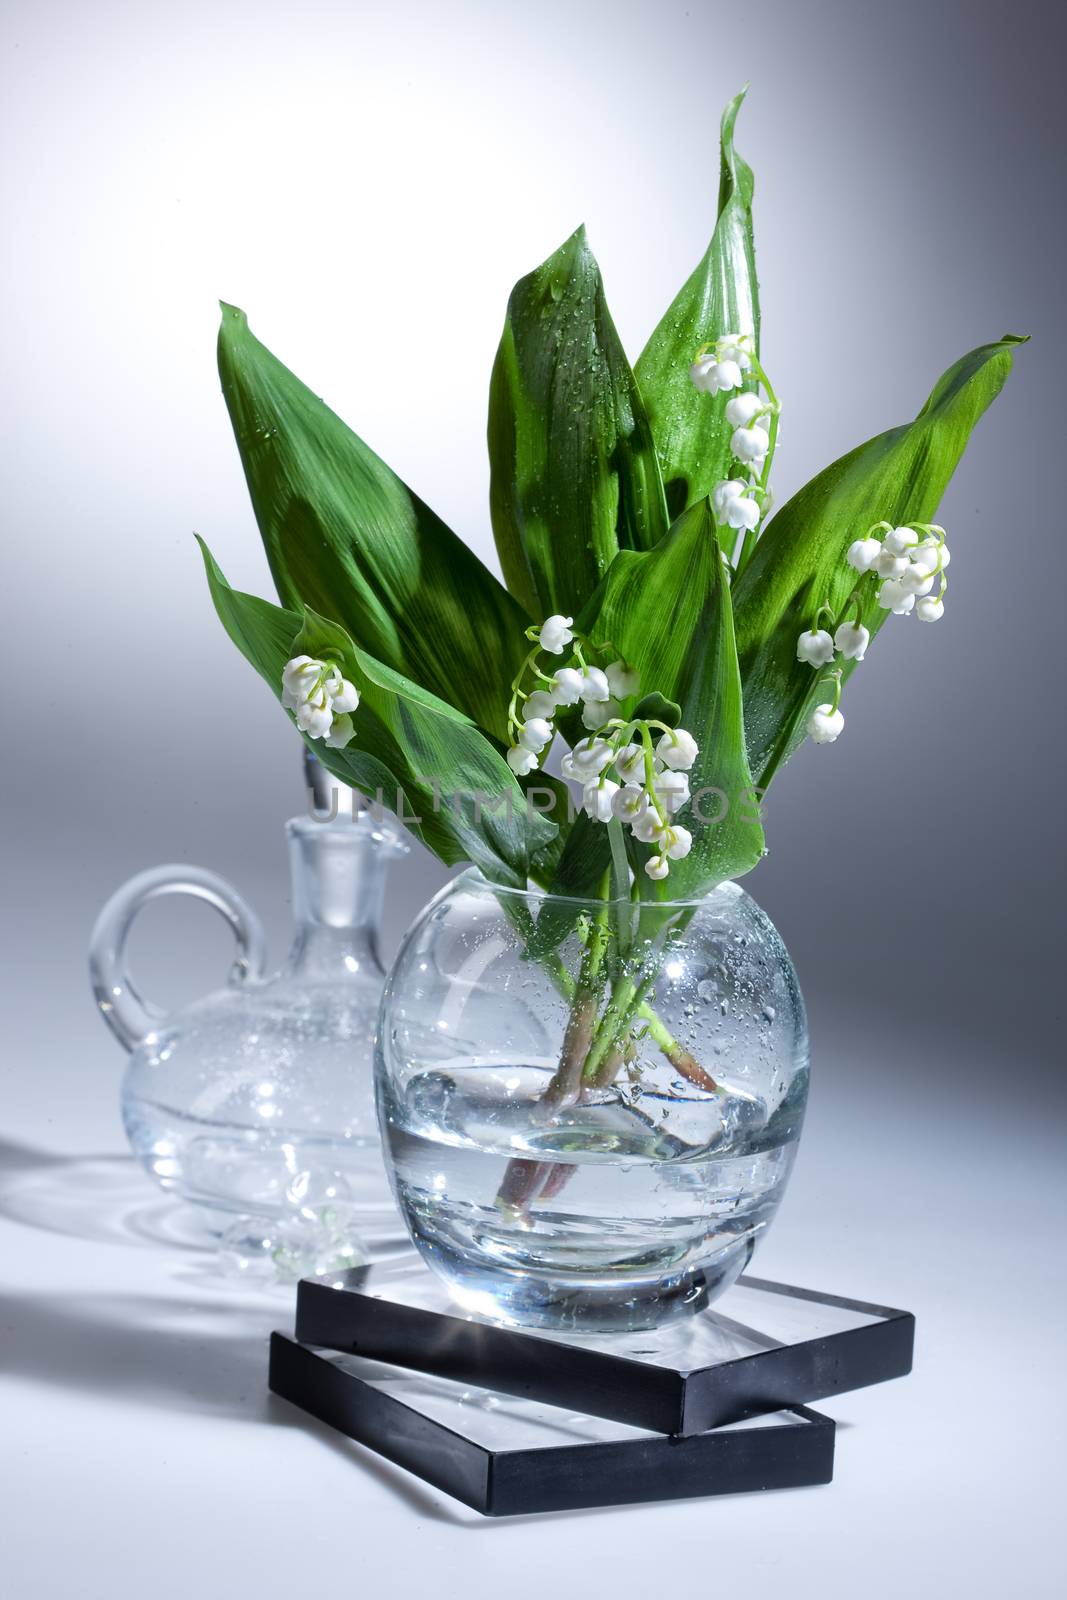 Lily of the valley in the glass vase